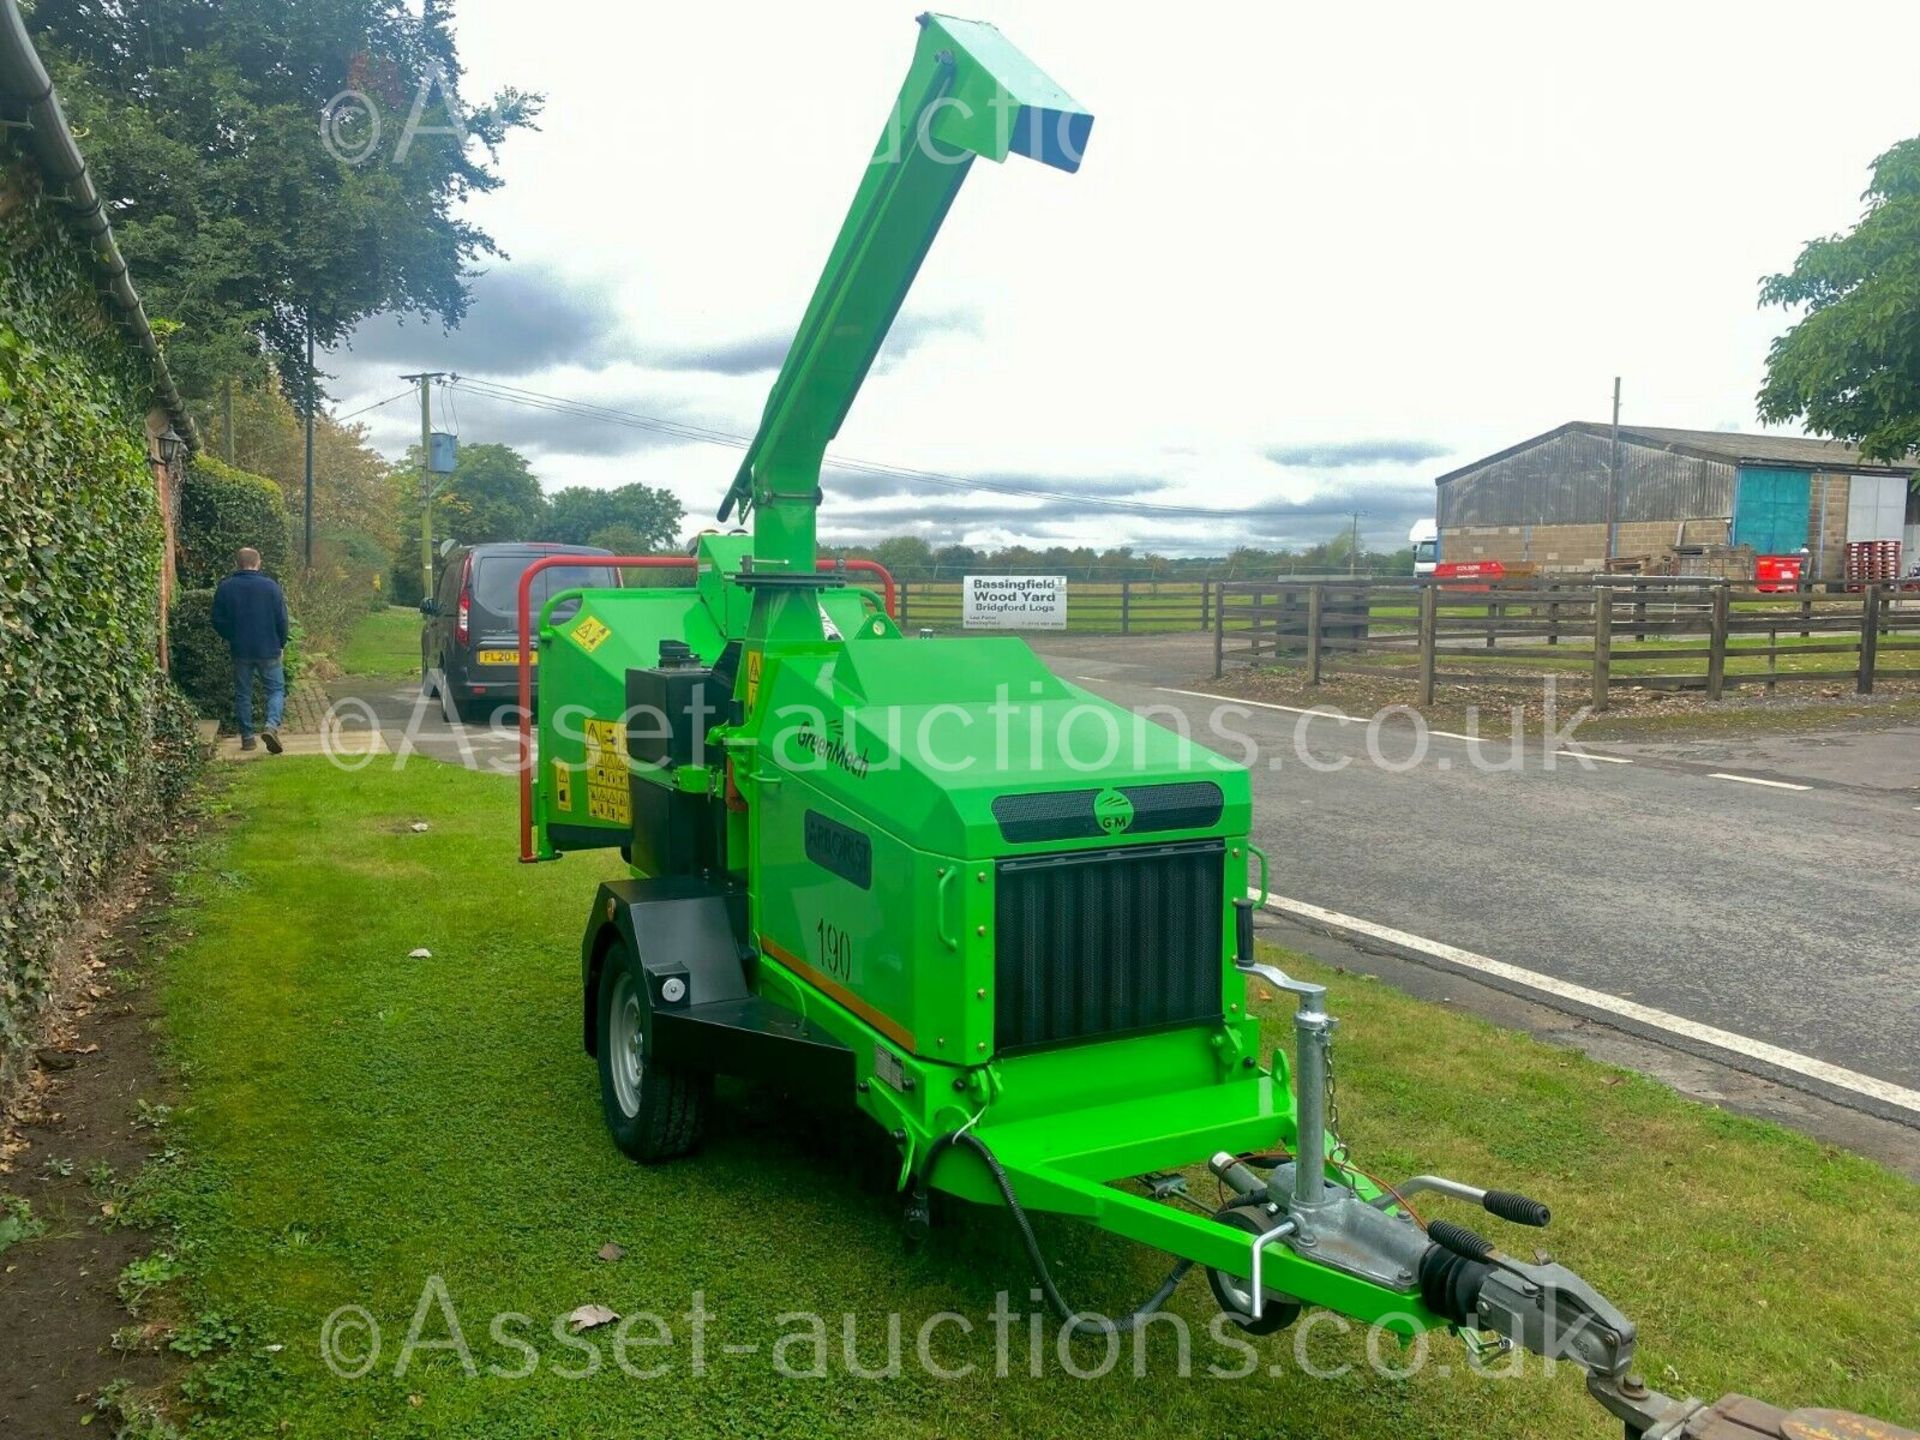 GREENMECH WOODCHIPPER, YEAR 2015, 190MM CHIPPING CAPACITY, ARBORIST 190, ONLY 275 HOURS *PLUS VAT* - Image 2 of 8